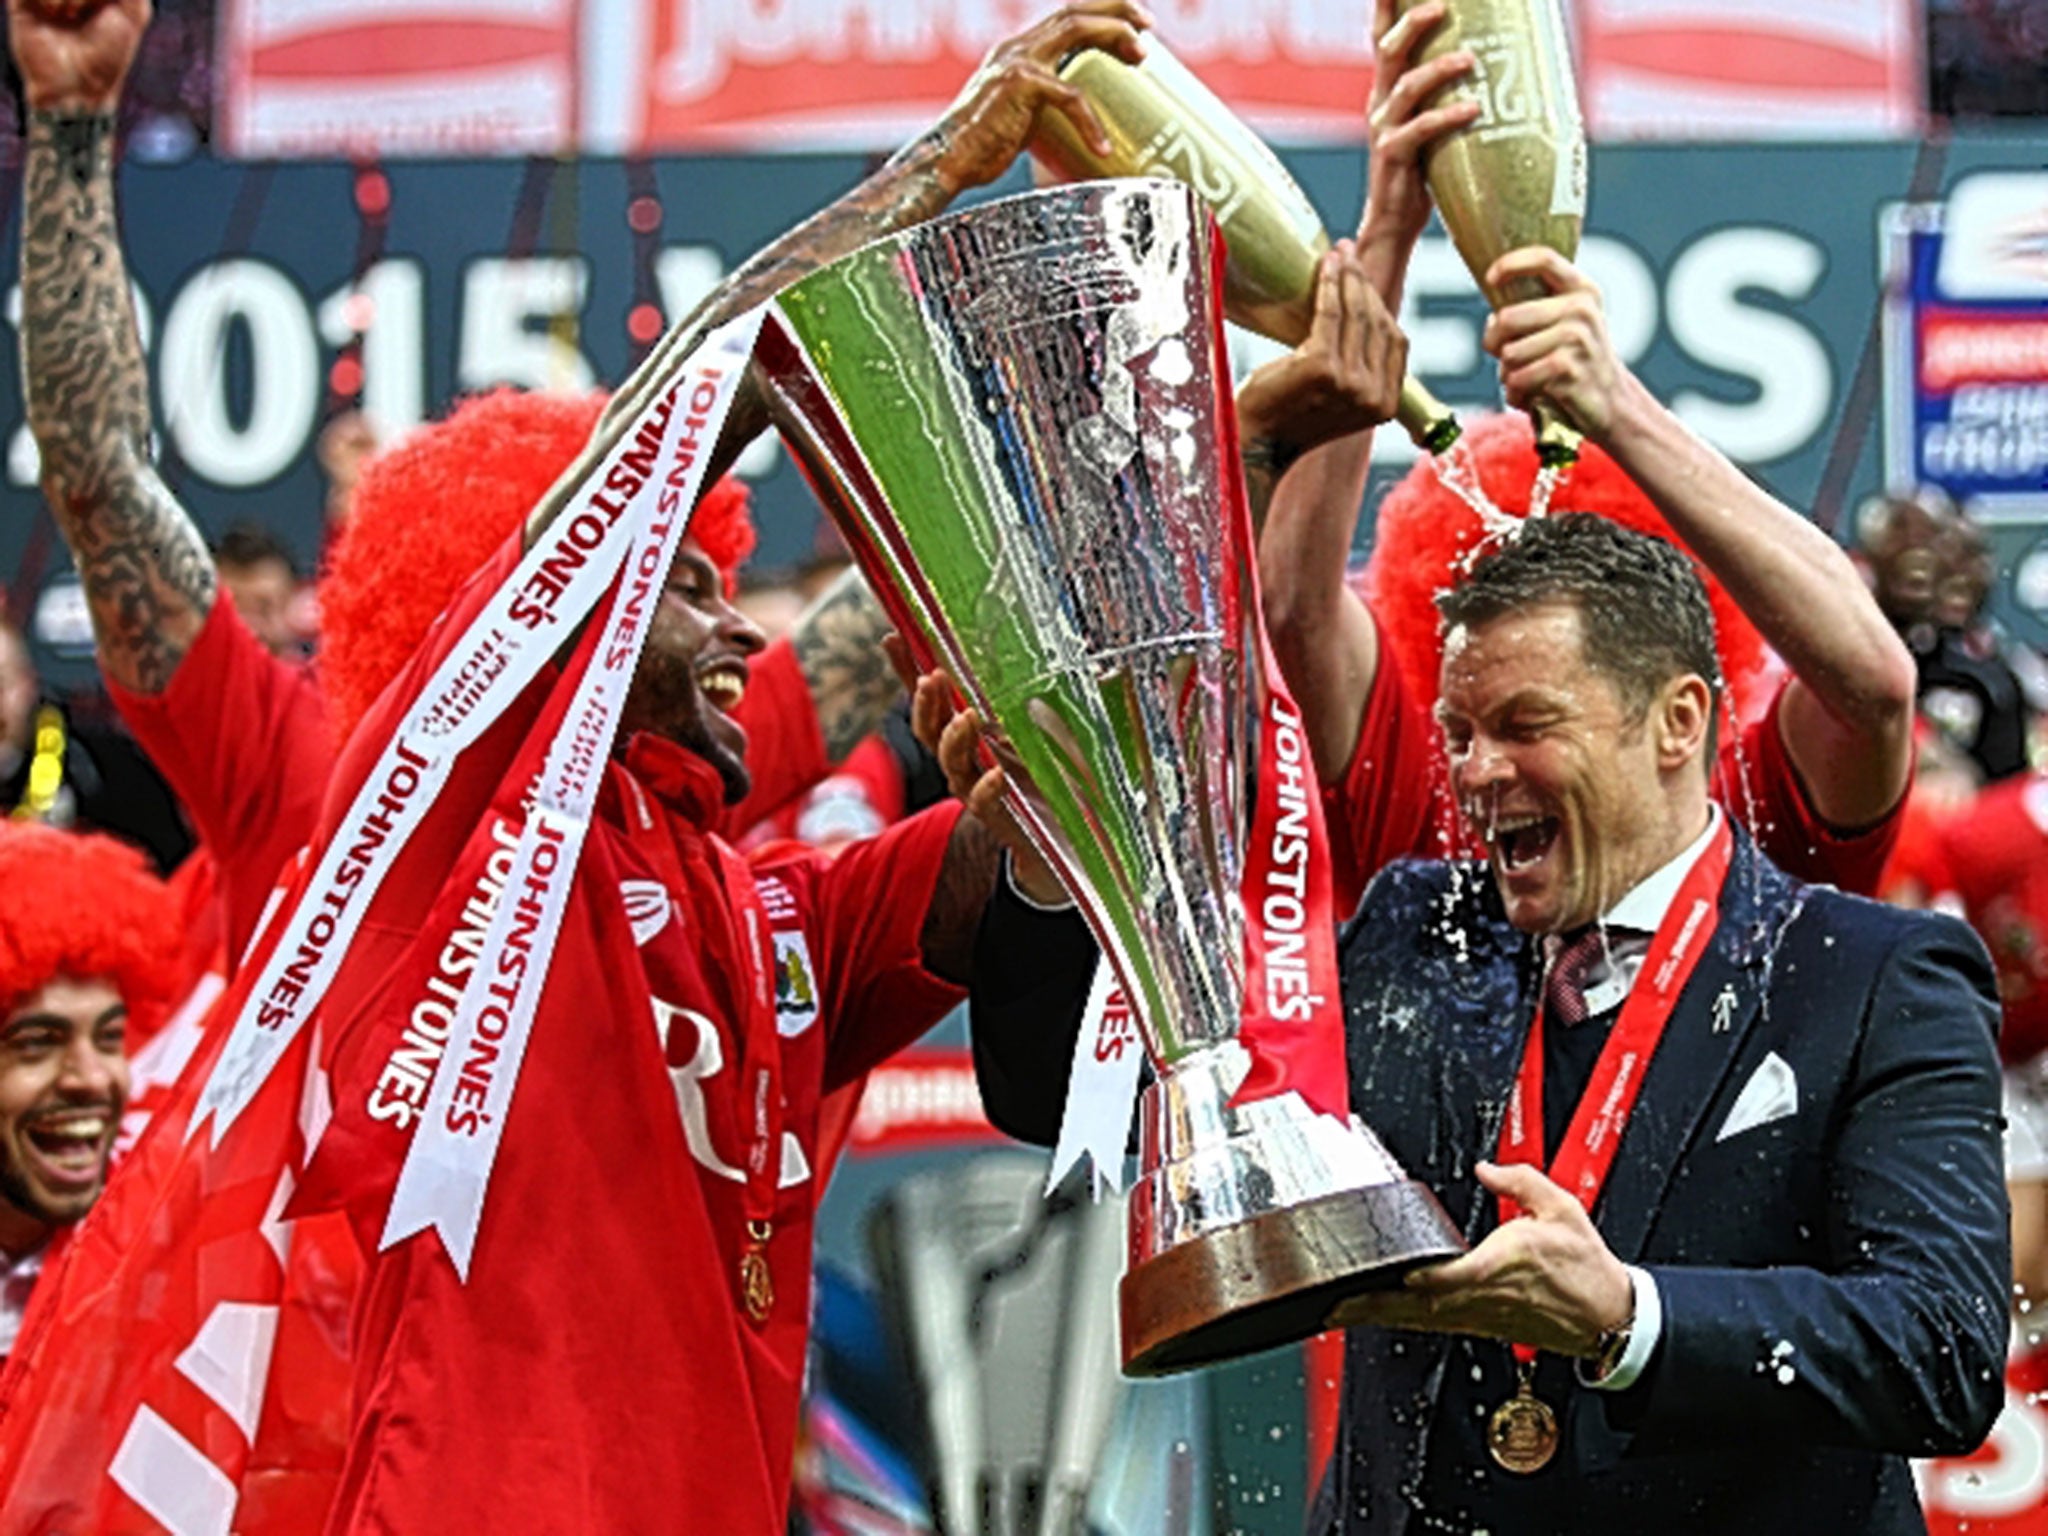 Steve Cotterill, the Bristol City manager, is drenched in champagne after Sunday’s victory at Wembley